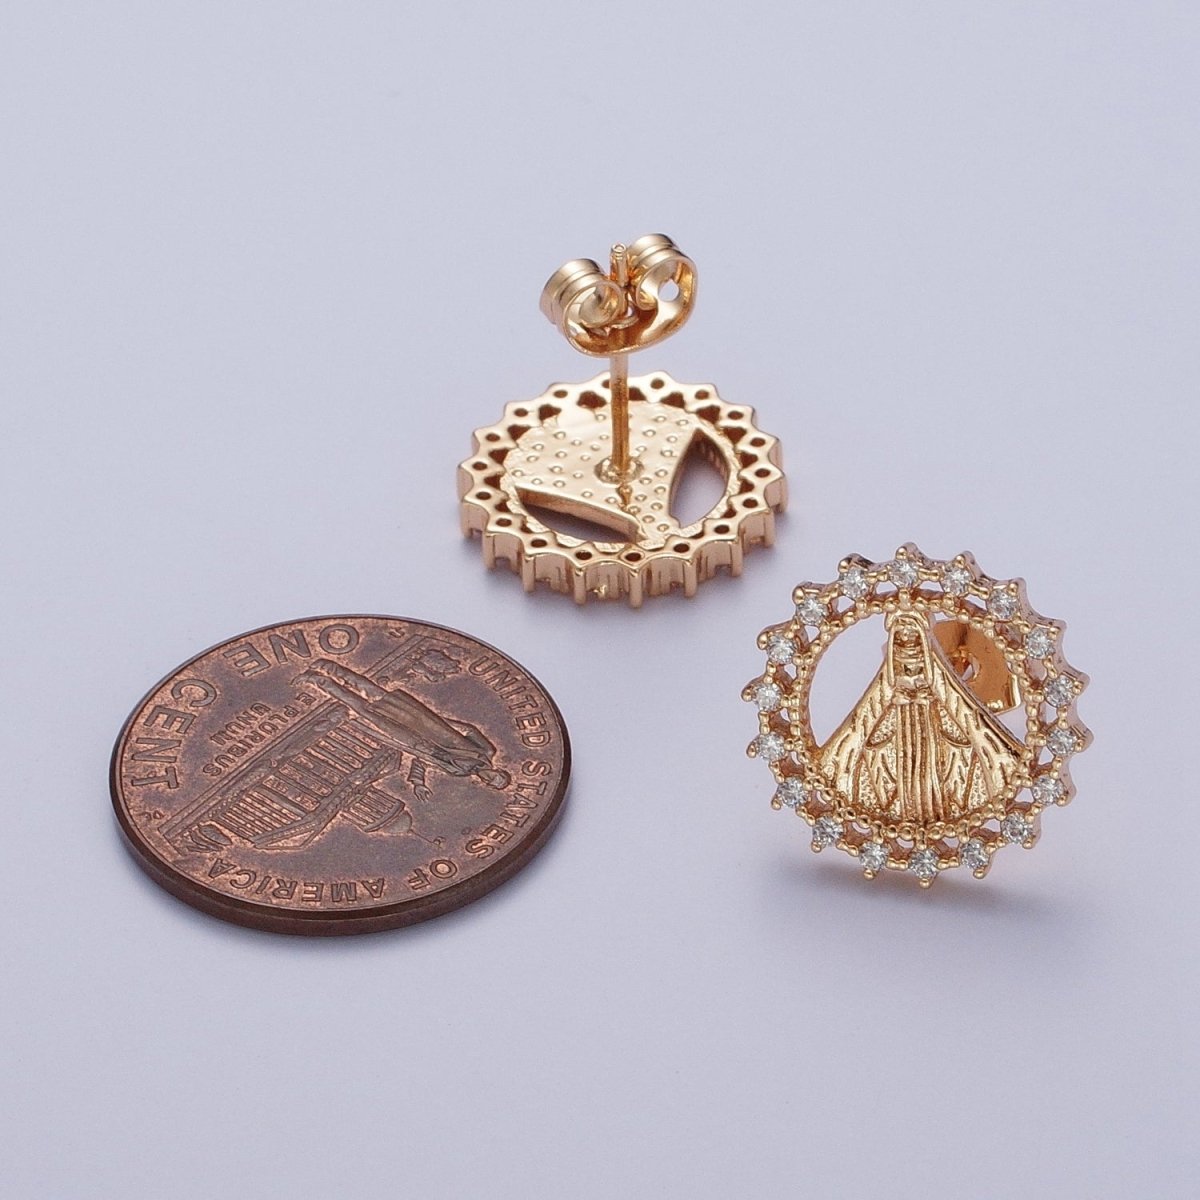 OS Gold Virgin Mary Stud Earring Sun Medallion Miraculous Lady Earring Catholic Religious Jewelry Gift AE-1049 - DLUXCA